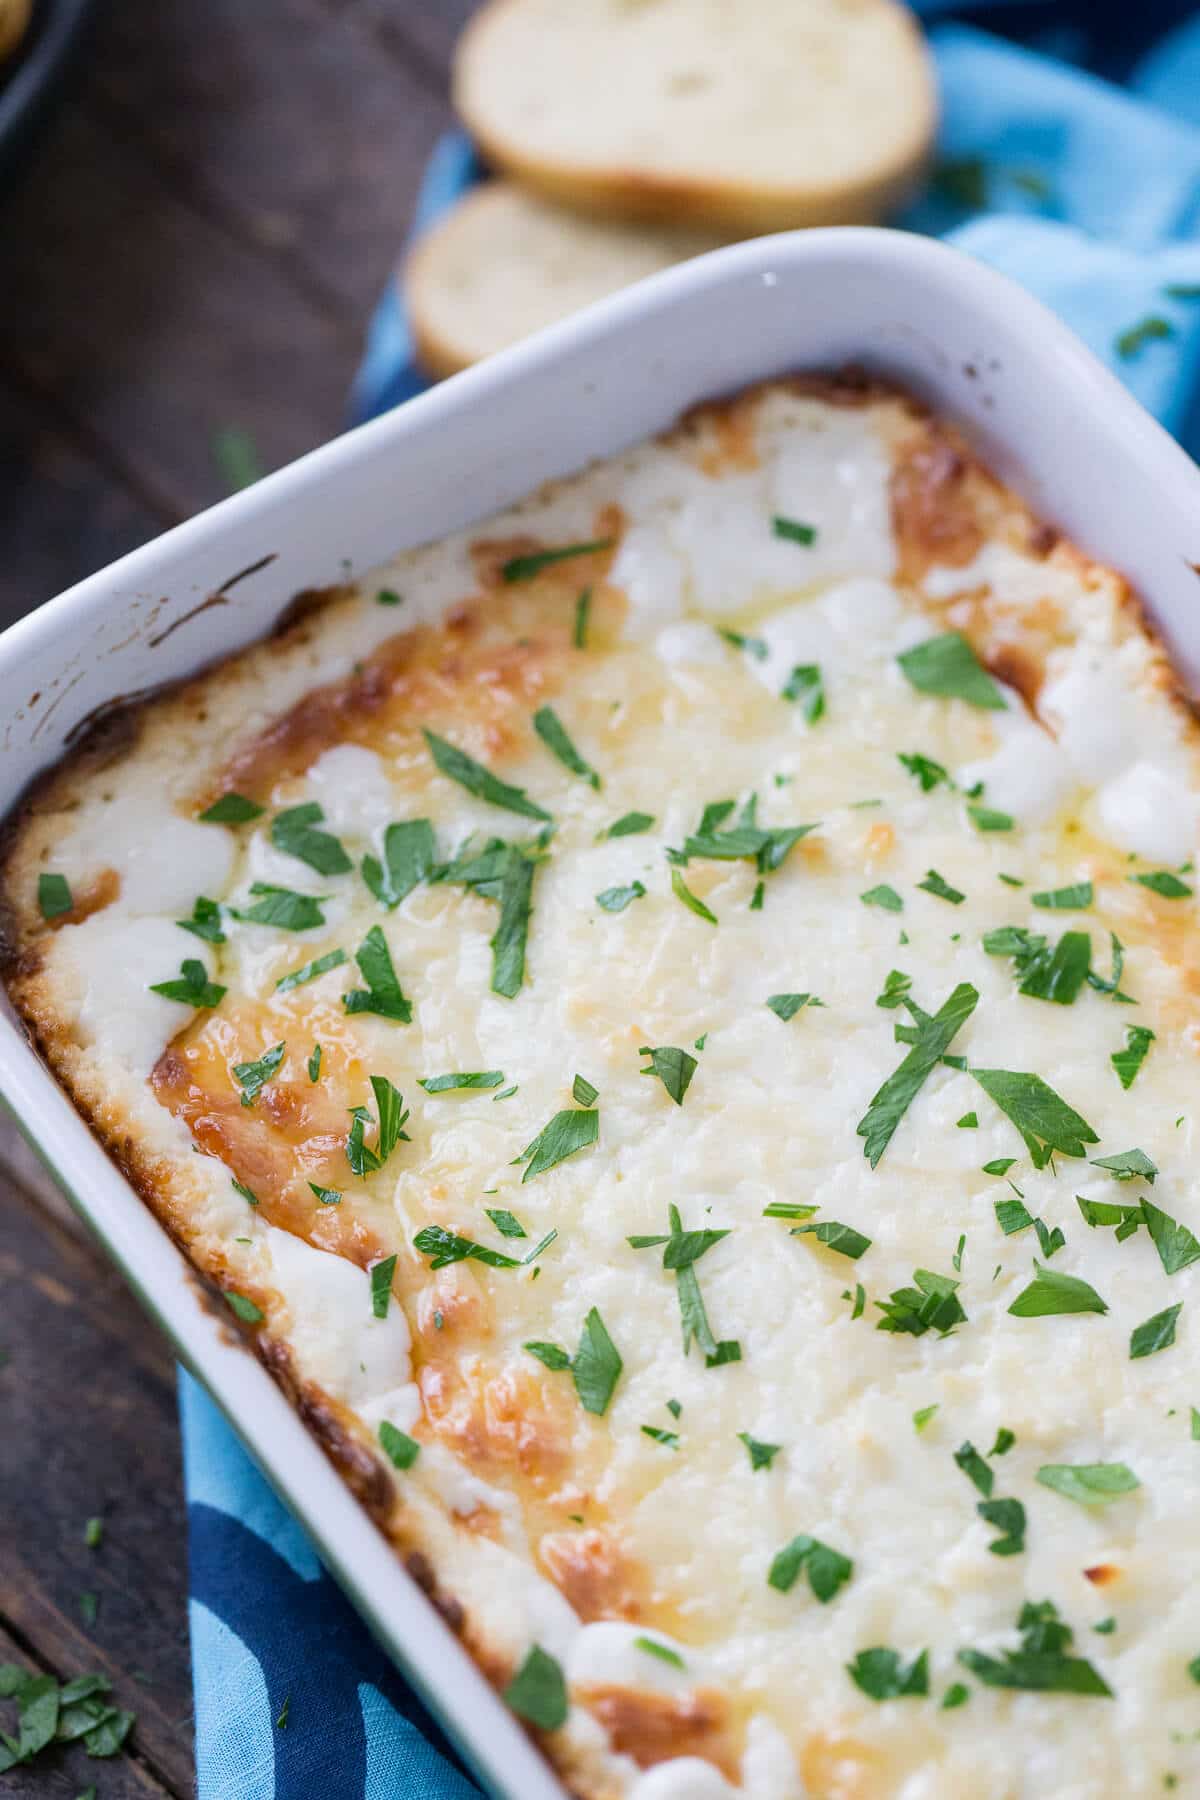 Raise your hand if garlic bread is your thing! This cheesy garlic bread dip is going to rock your world!